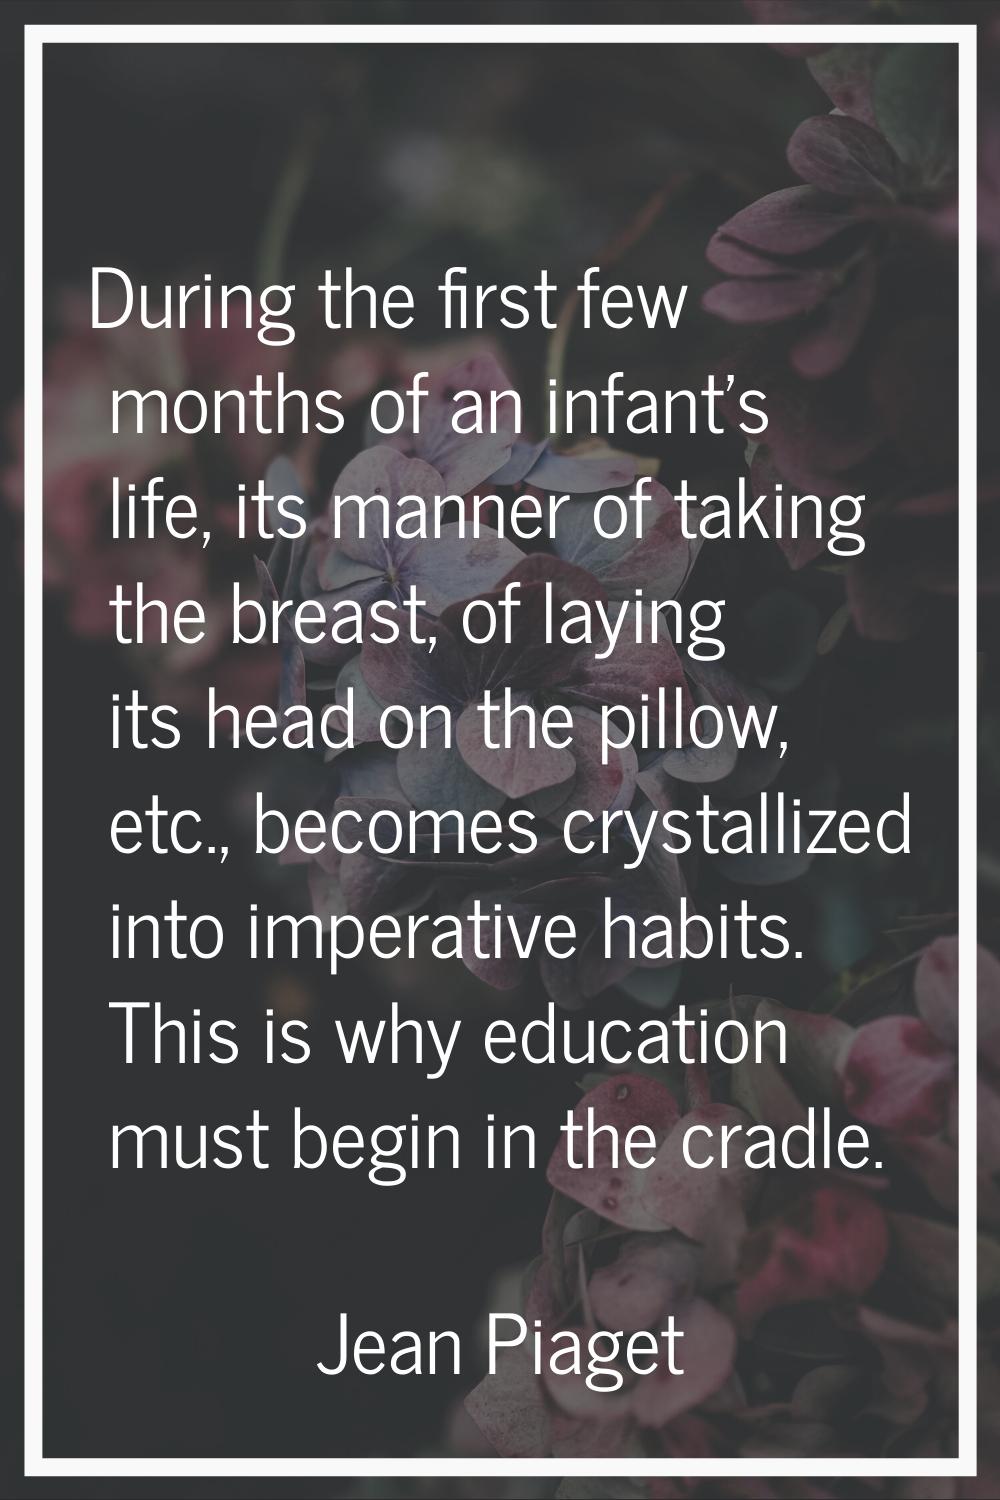 During the first few months of an infant's life, its manner of taking the breast, of laying its hea